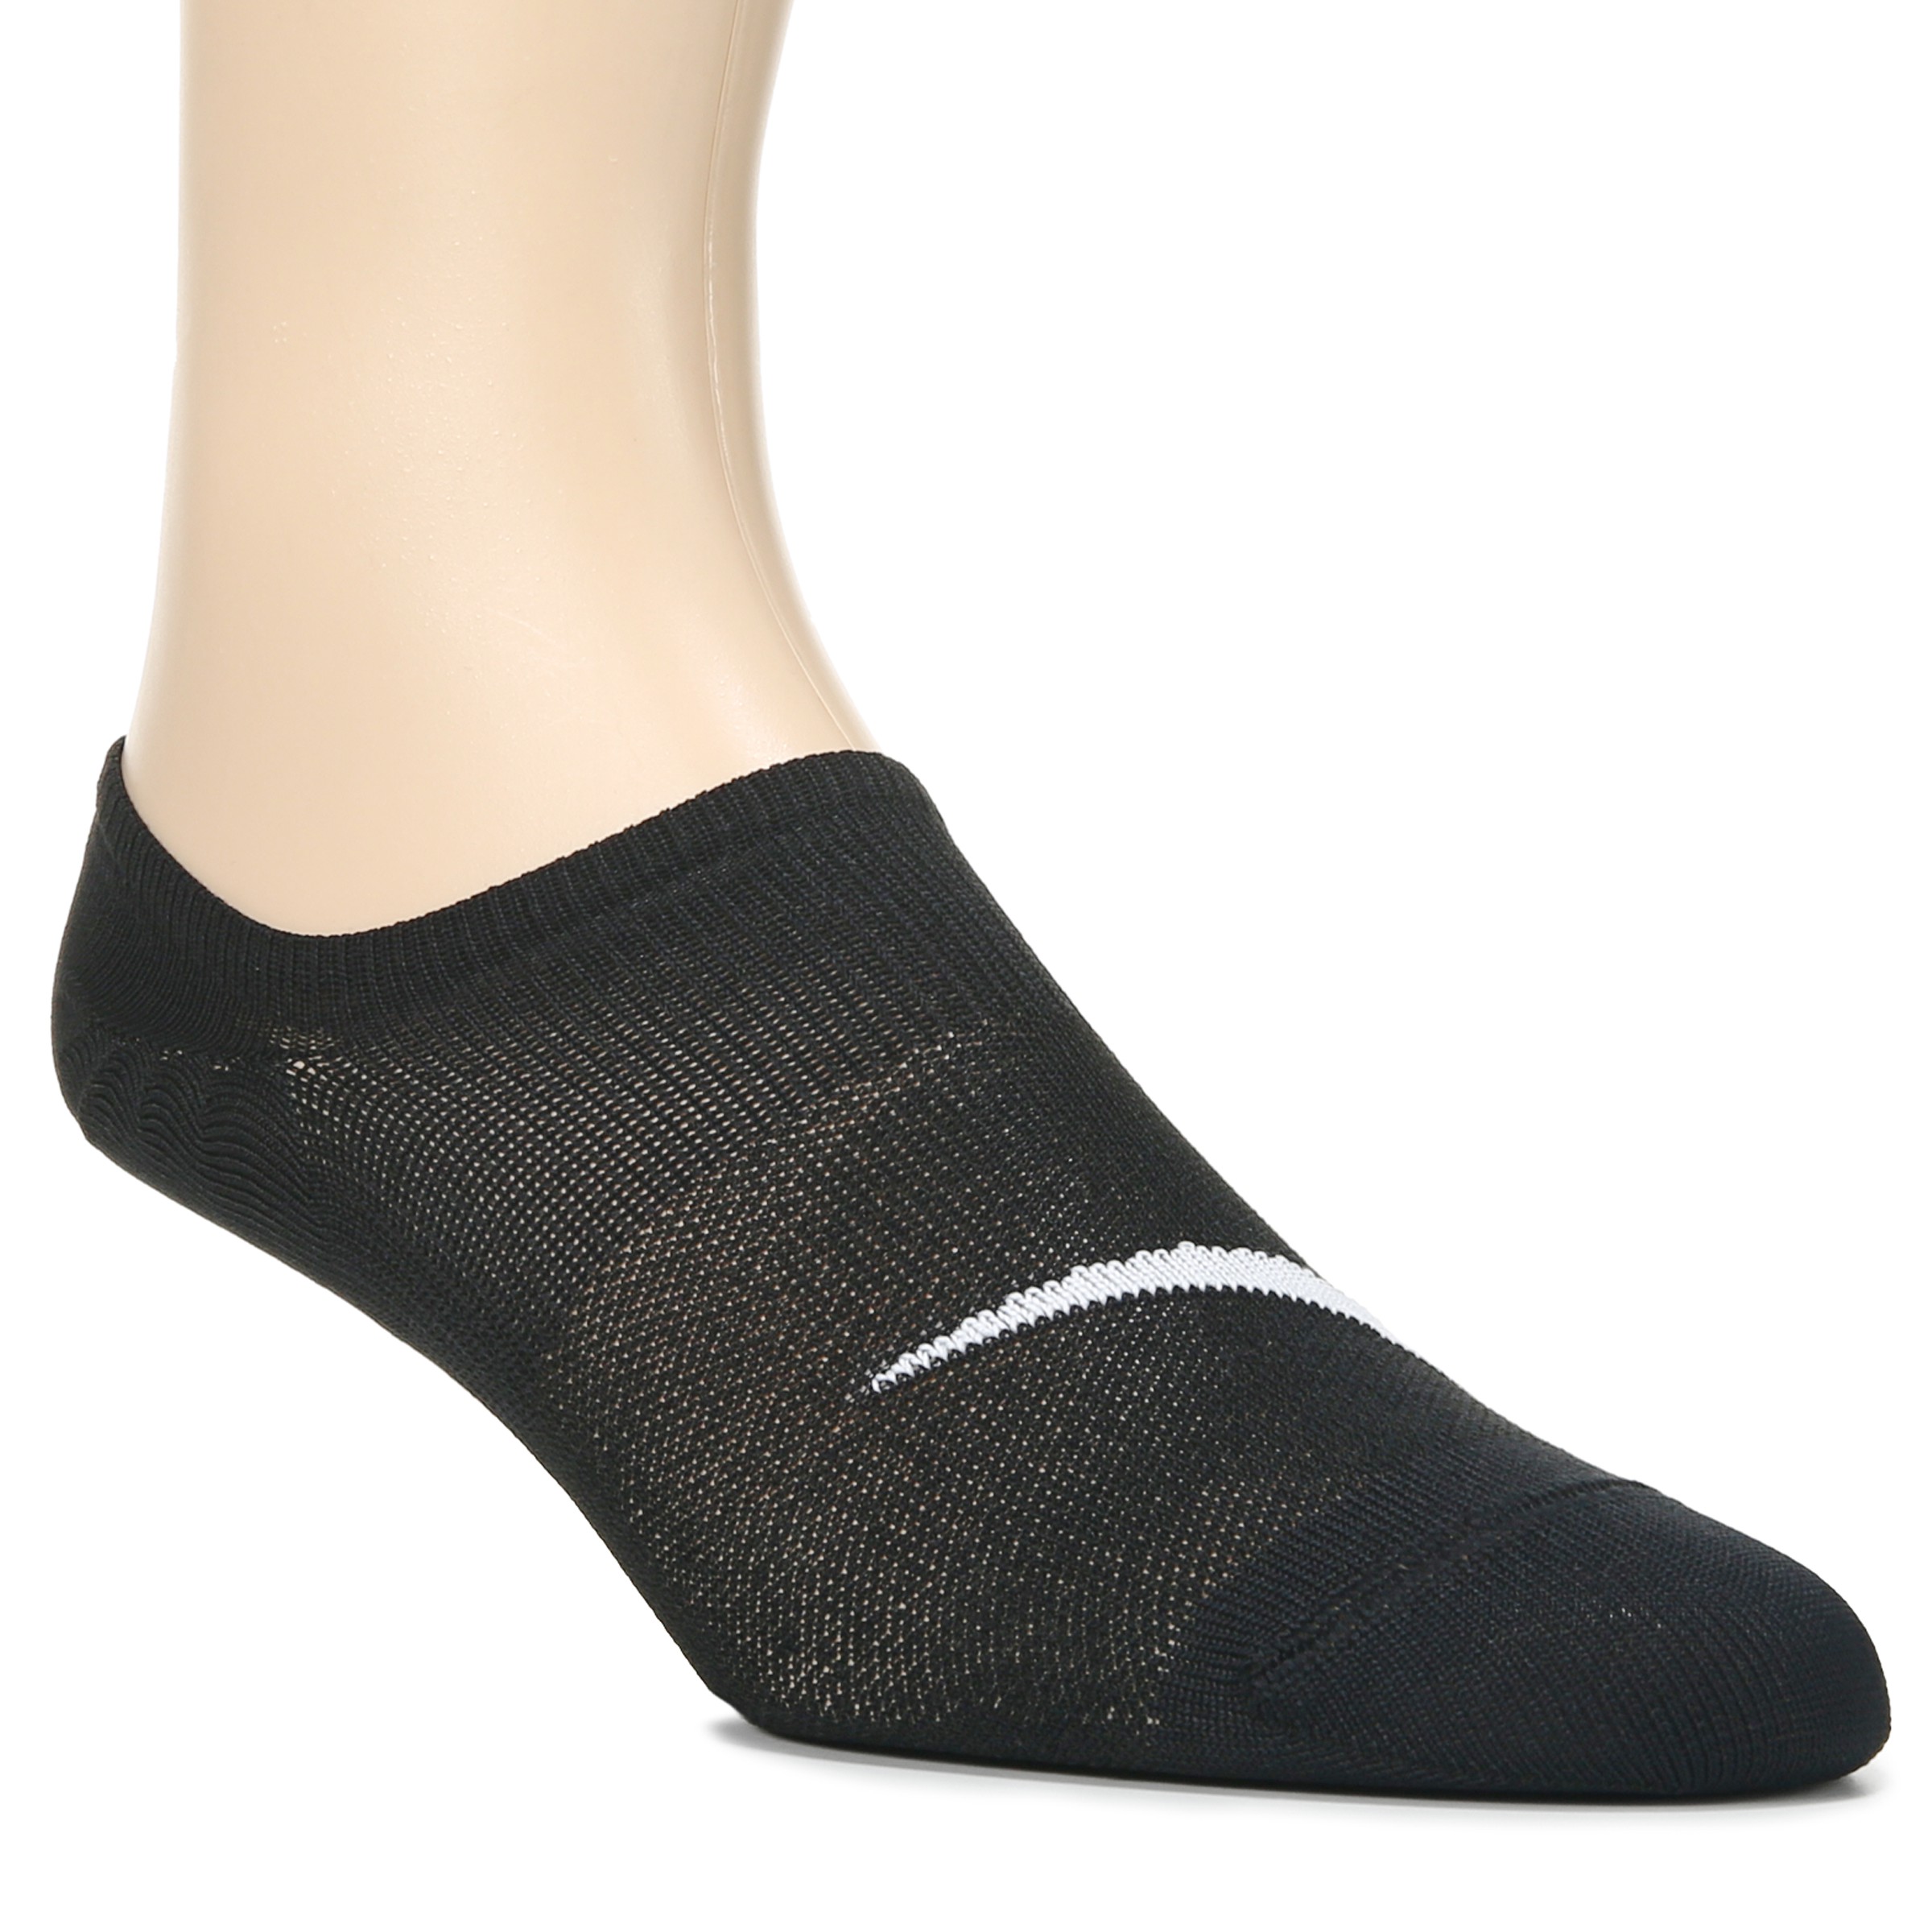 Chaussettes femme Nike everyday plus lightweight - Nike - Marques